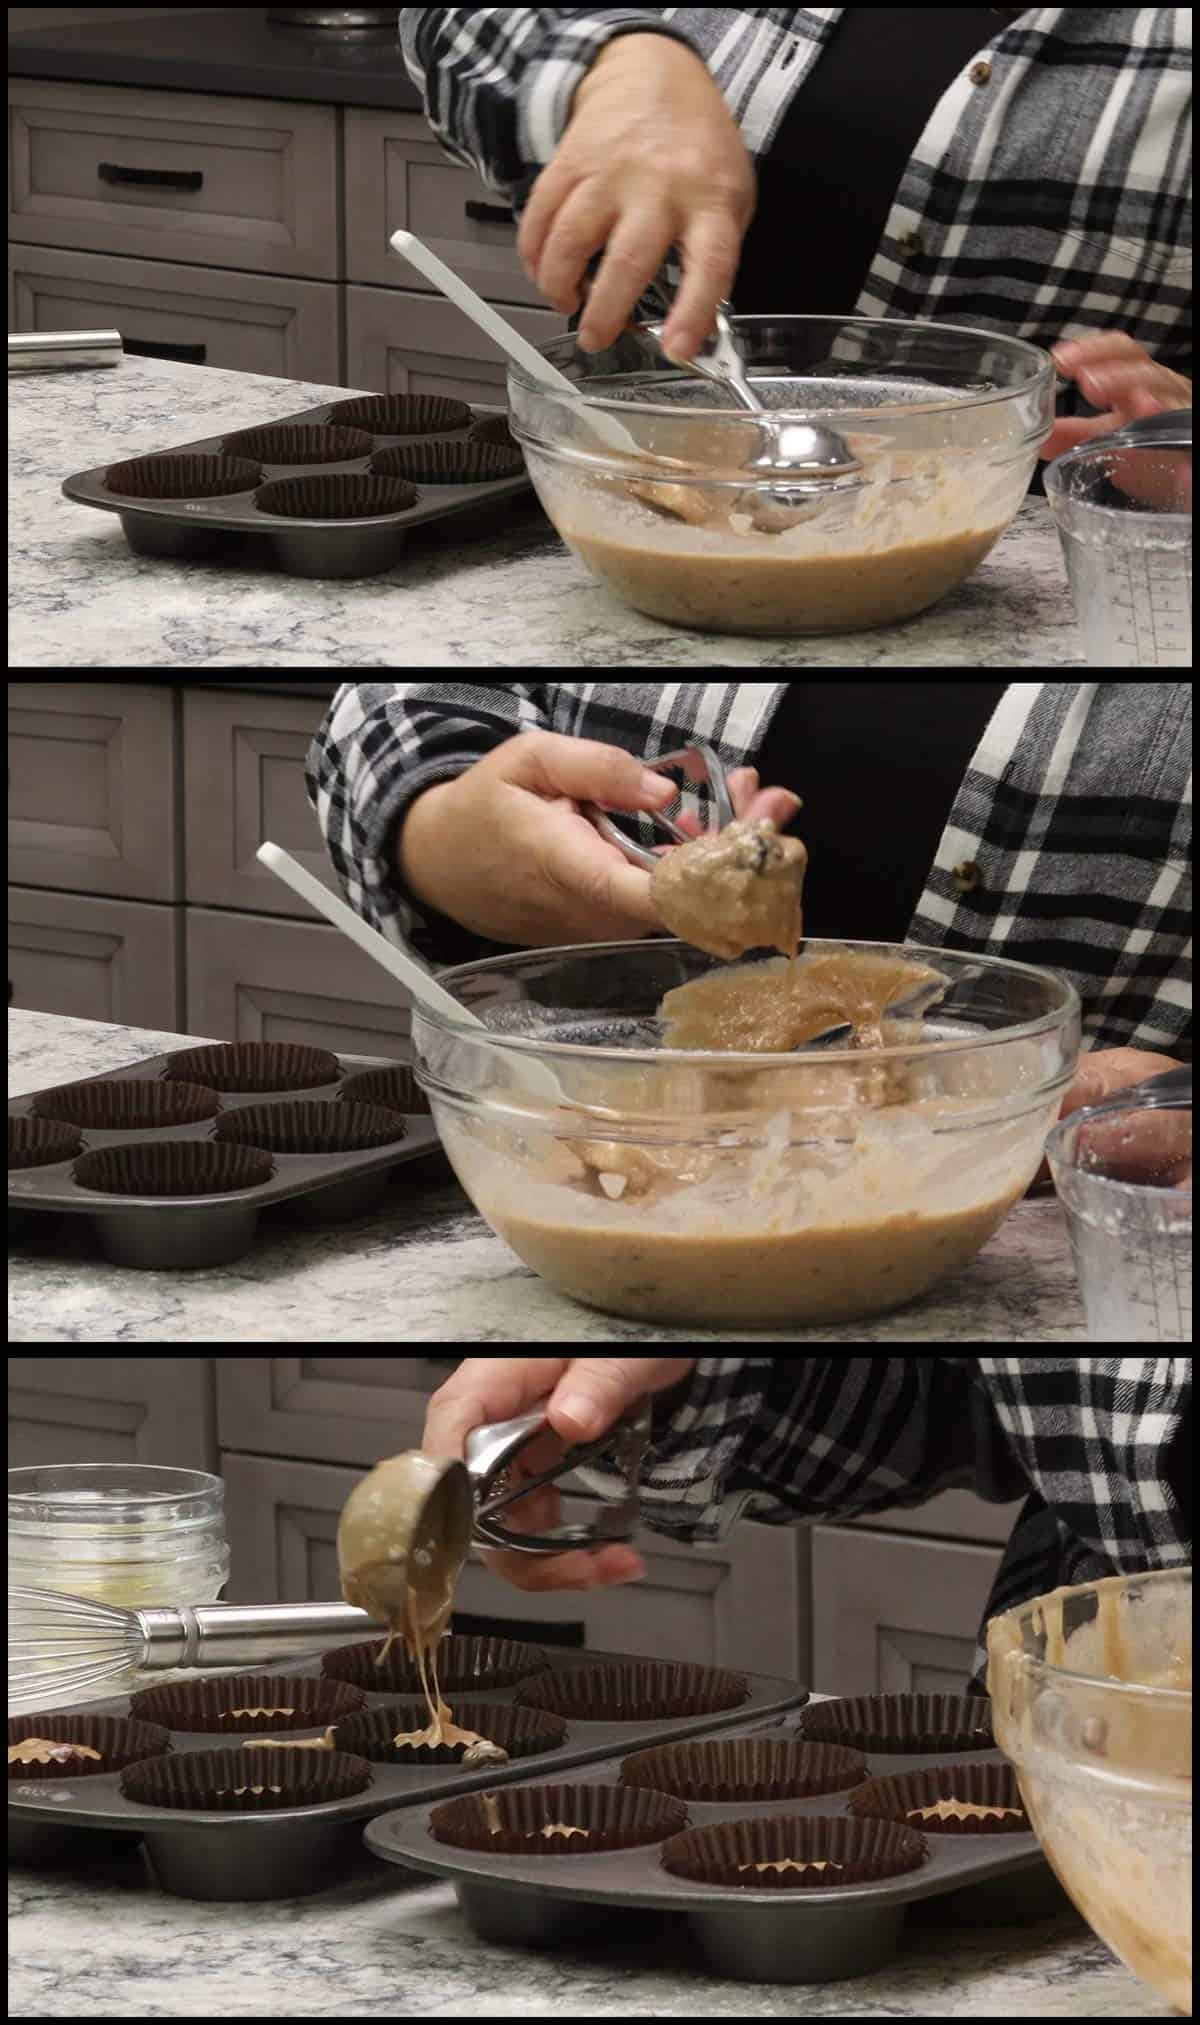 Scooping muffin batter into muffin pan.